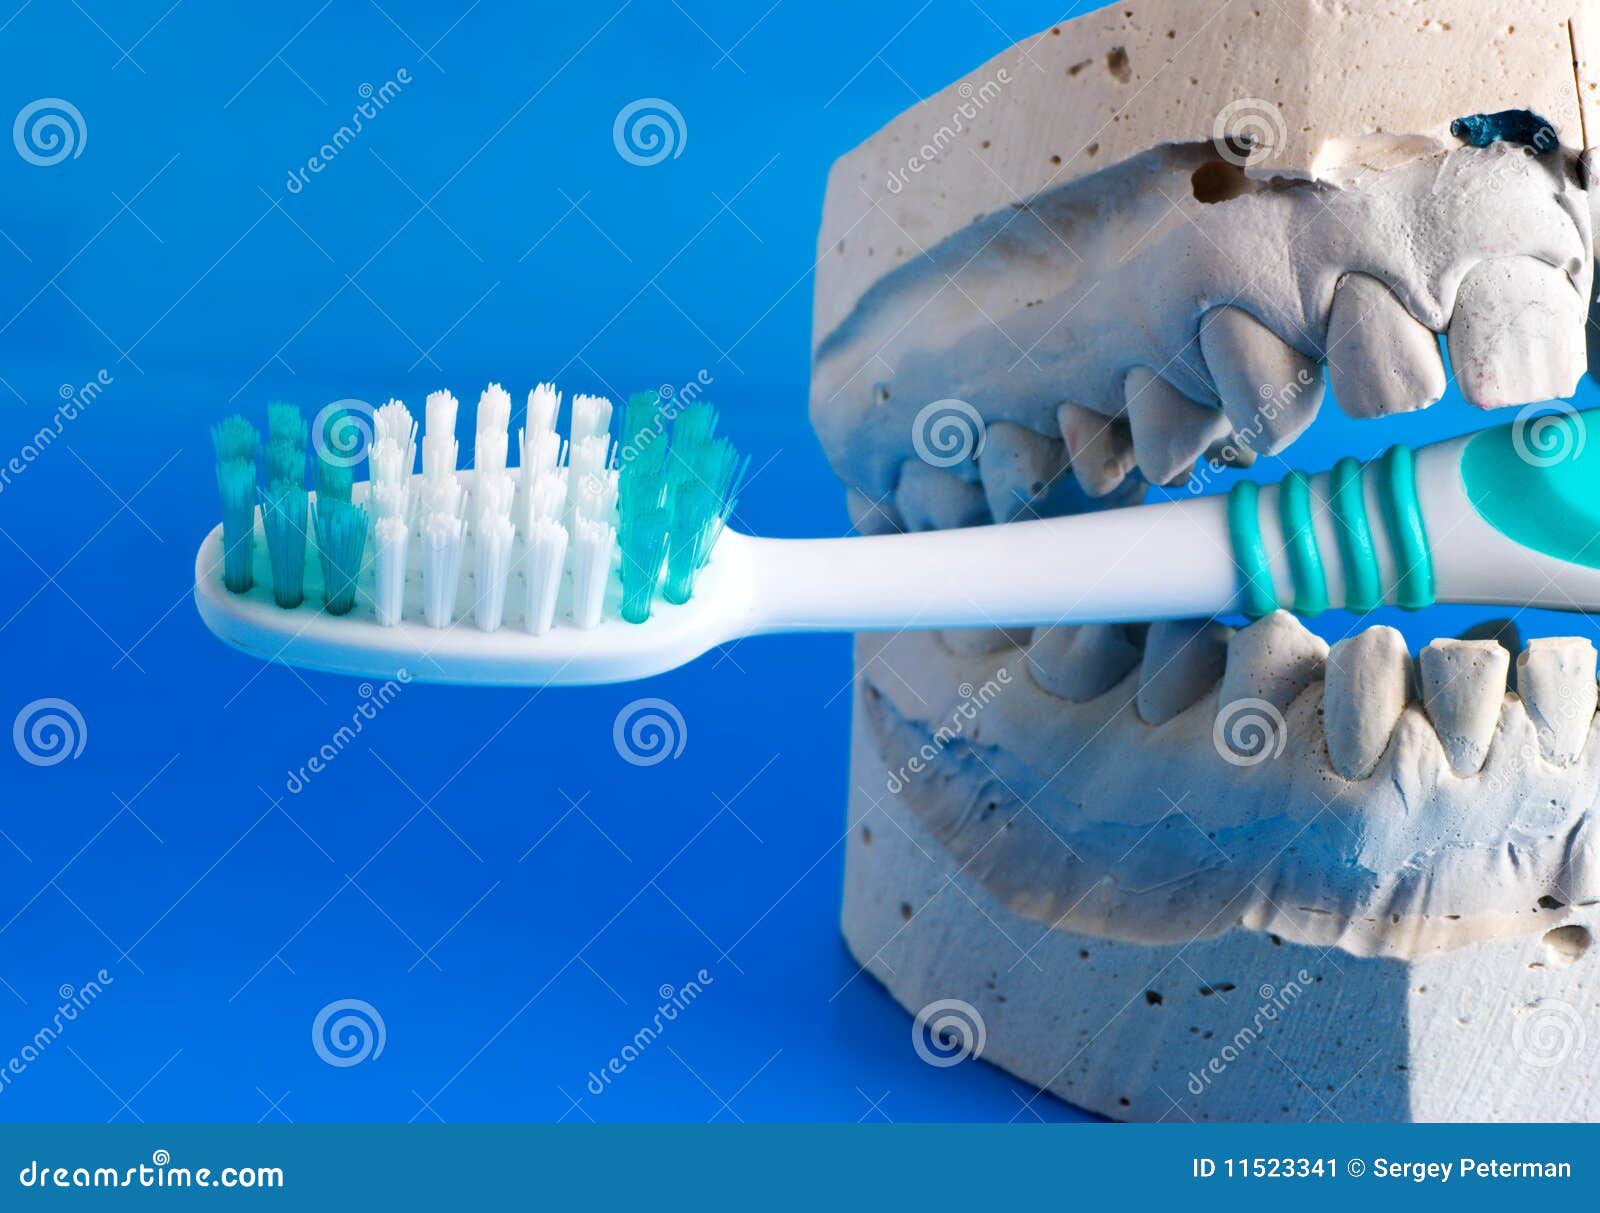 Why to clean your teeth stock image. Image of medical - 11523341